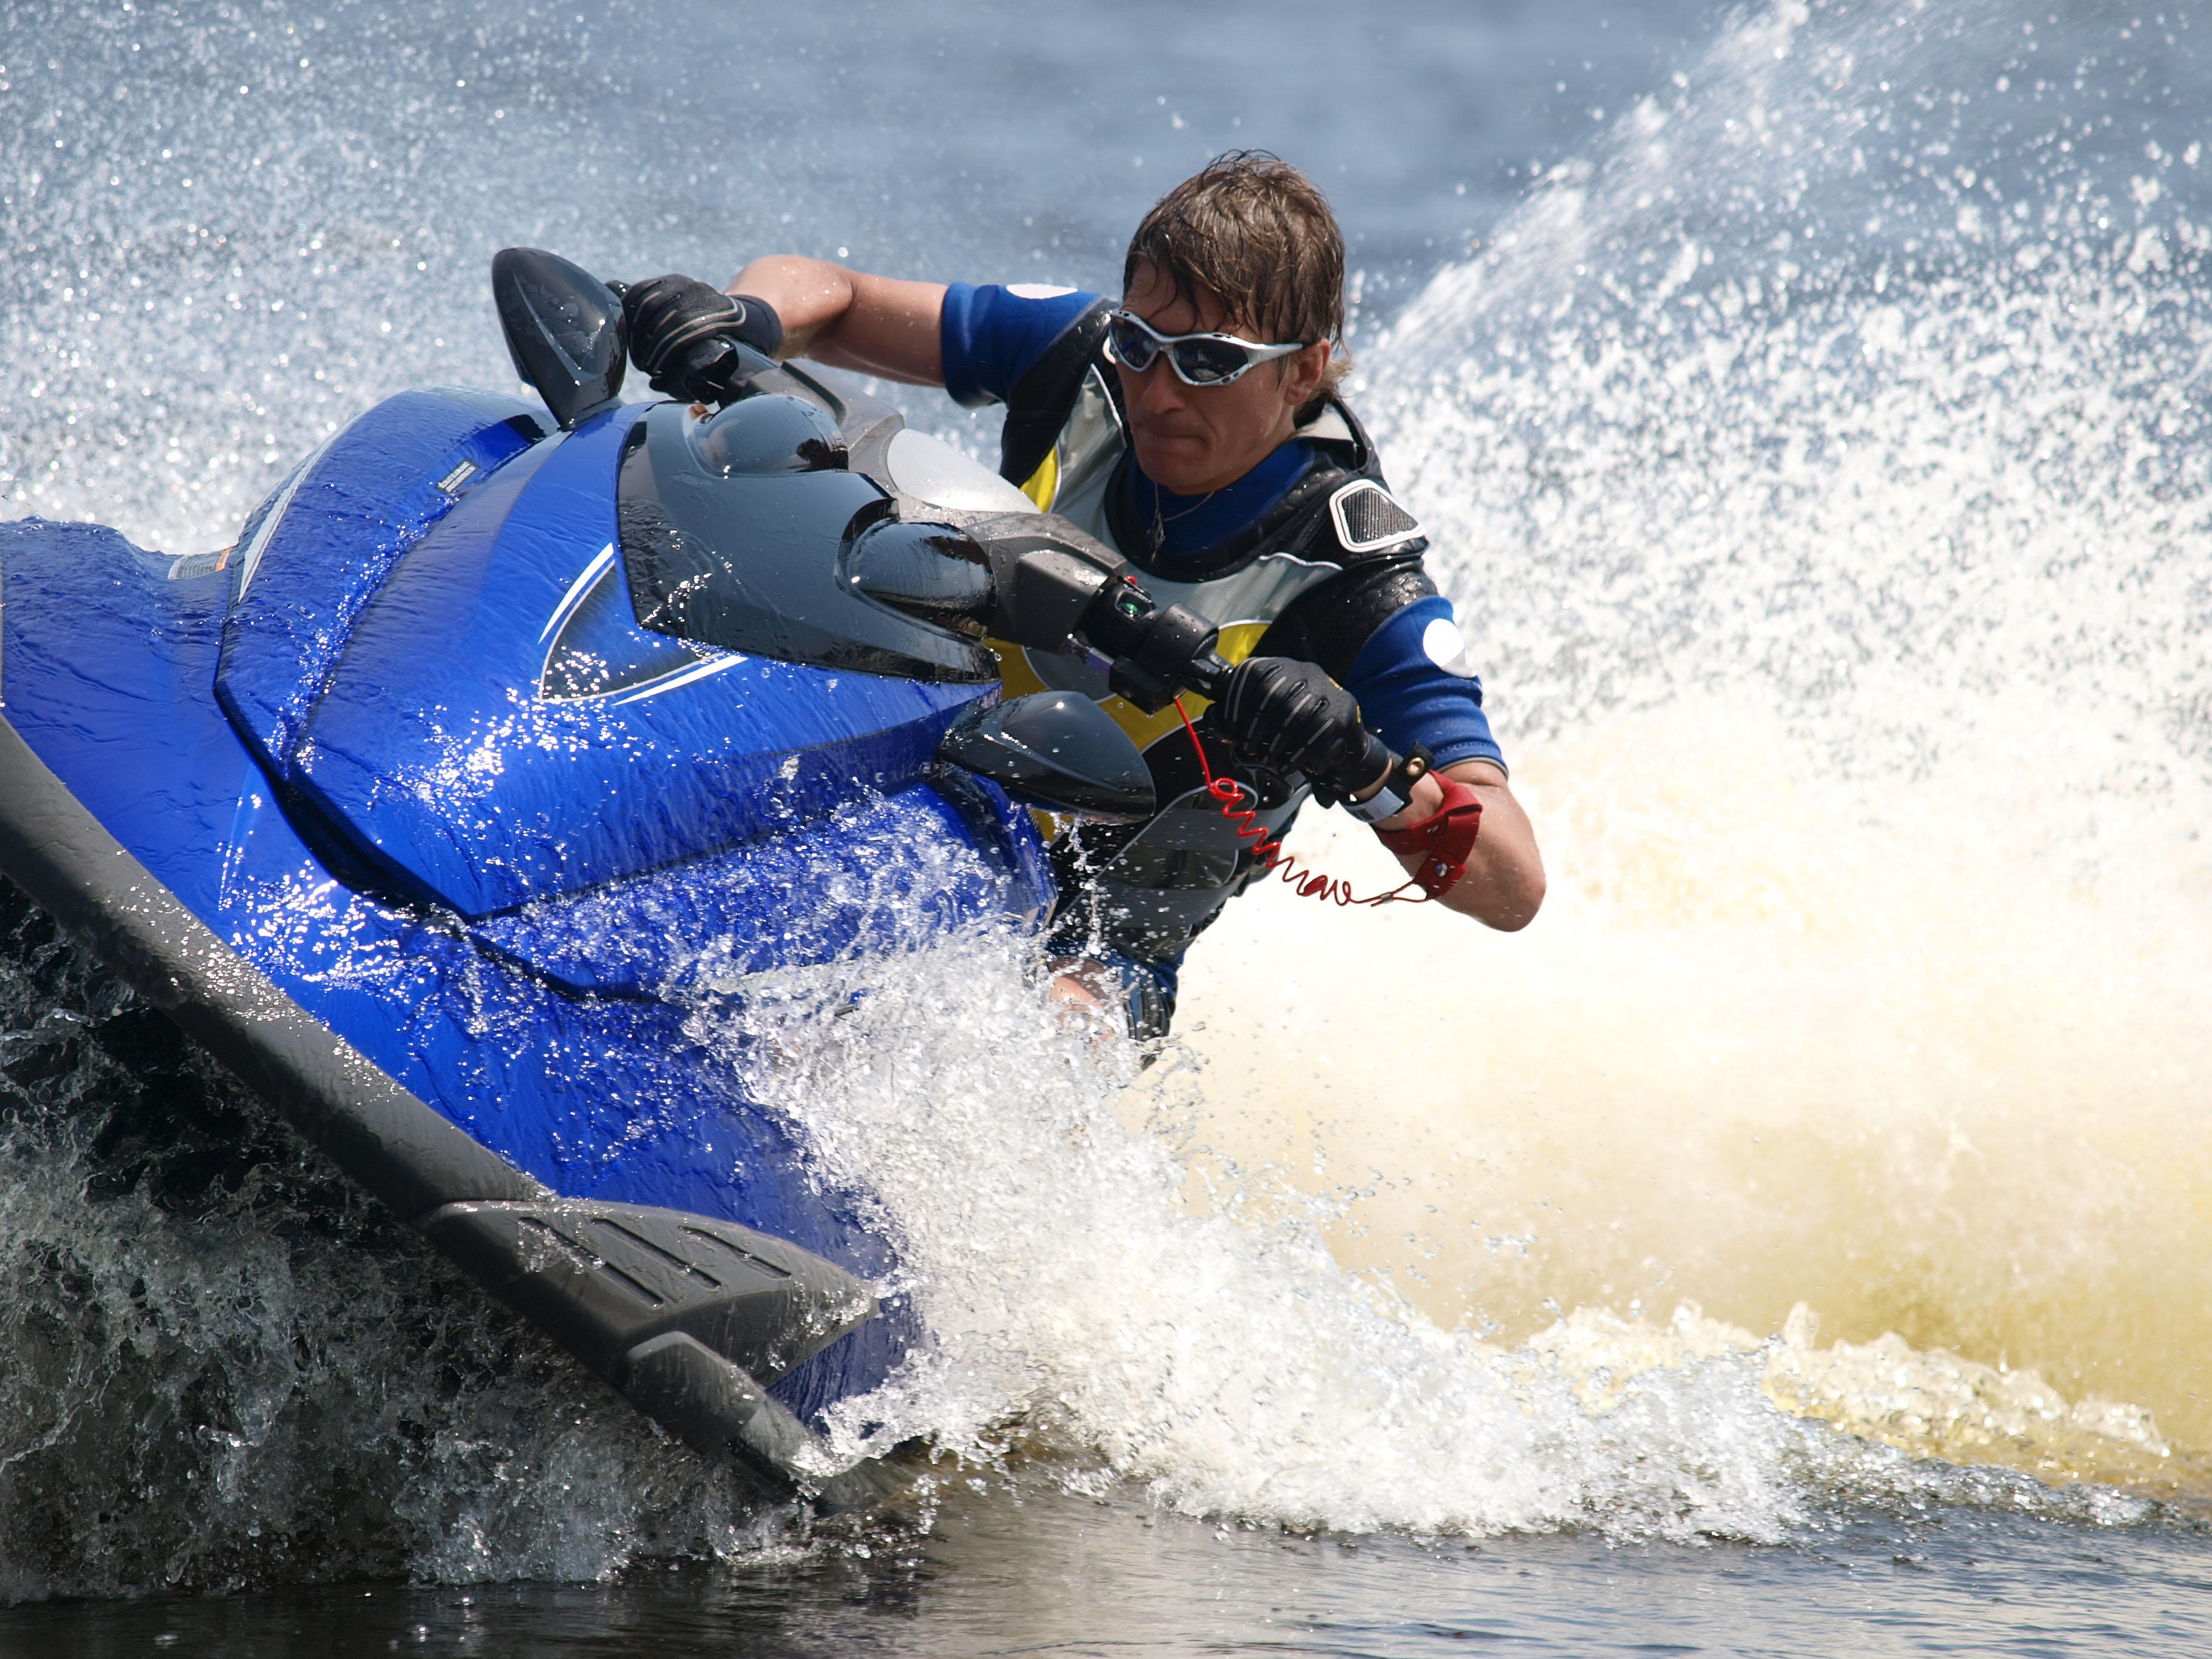 Pontoon Rentals, Water Craft Rentals, Fishing Boat Rentals, and Fishing Guide Experiences in Minocqua Wisconsin